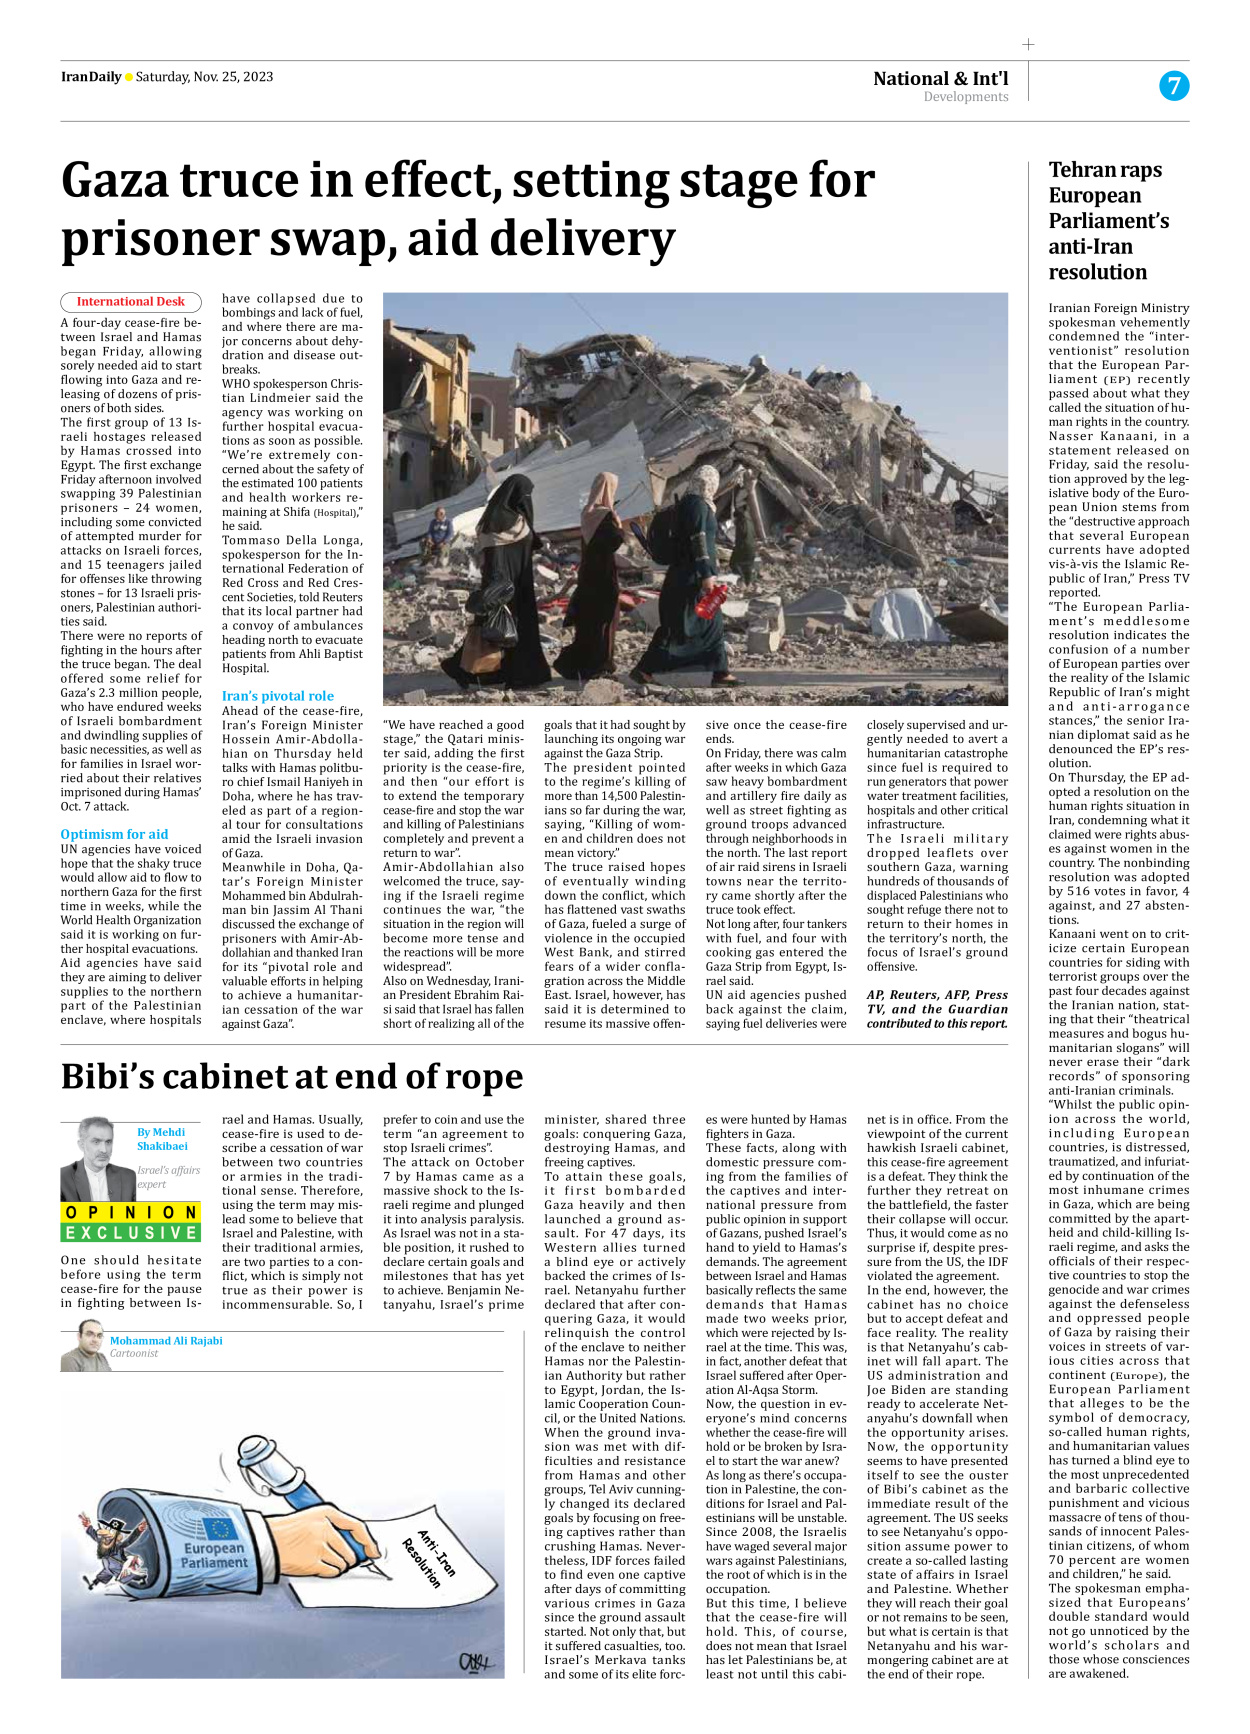 Iran Daily - Number Seven Thousand Four Hundred and Forty Three - 25 November 2023 - Page 7